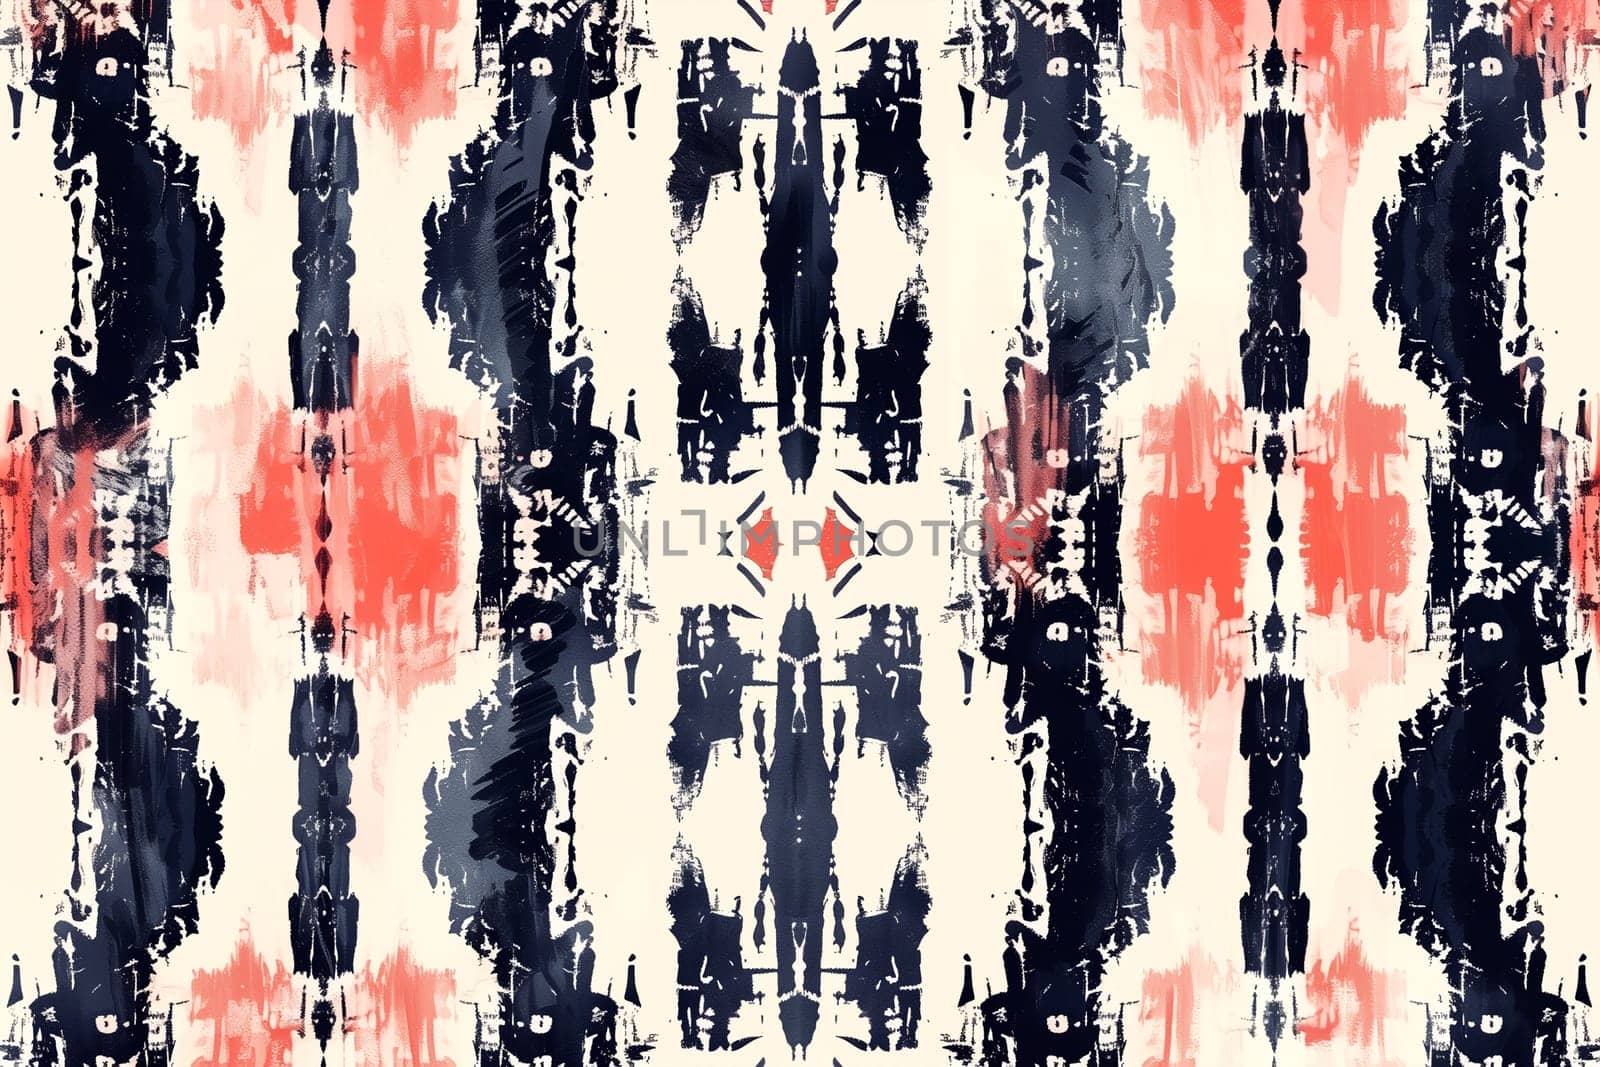 An abstract pattern in black, white, and red colors with intricate geometric shapes and lines creating a visually striking design.